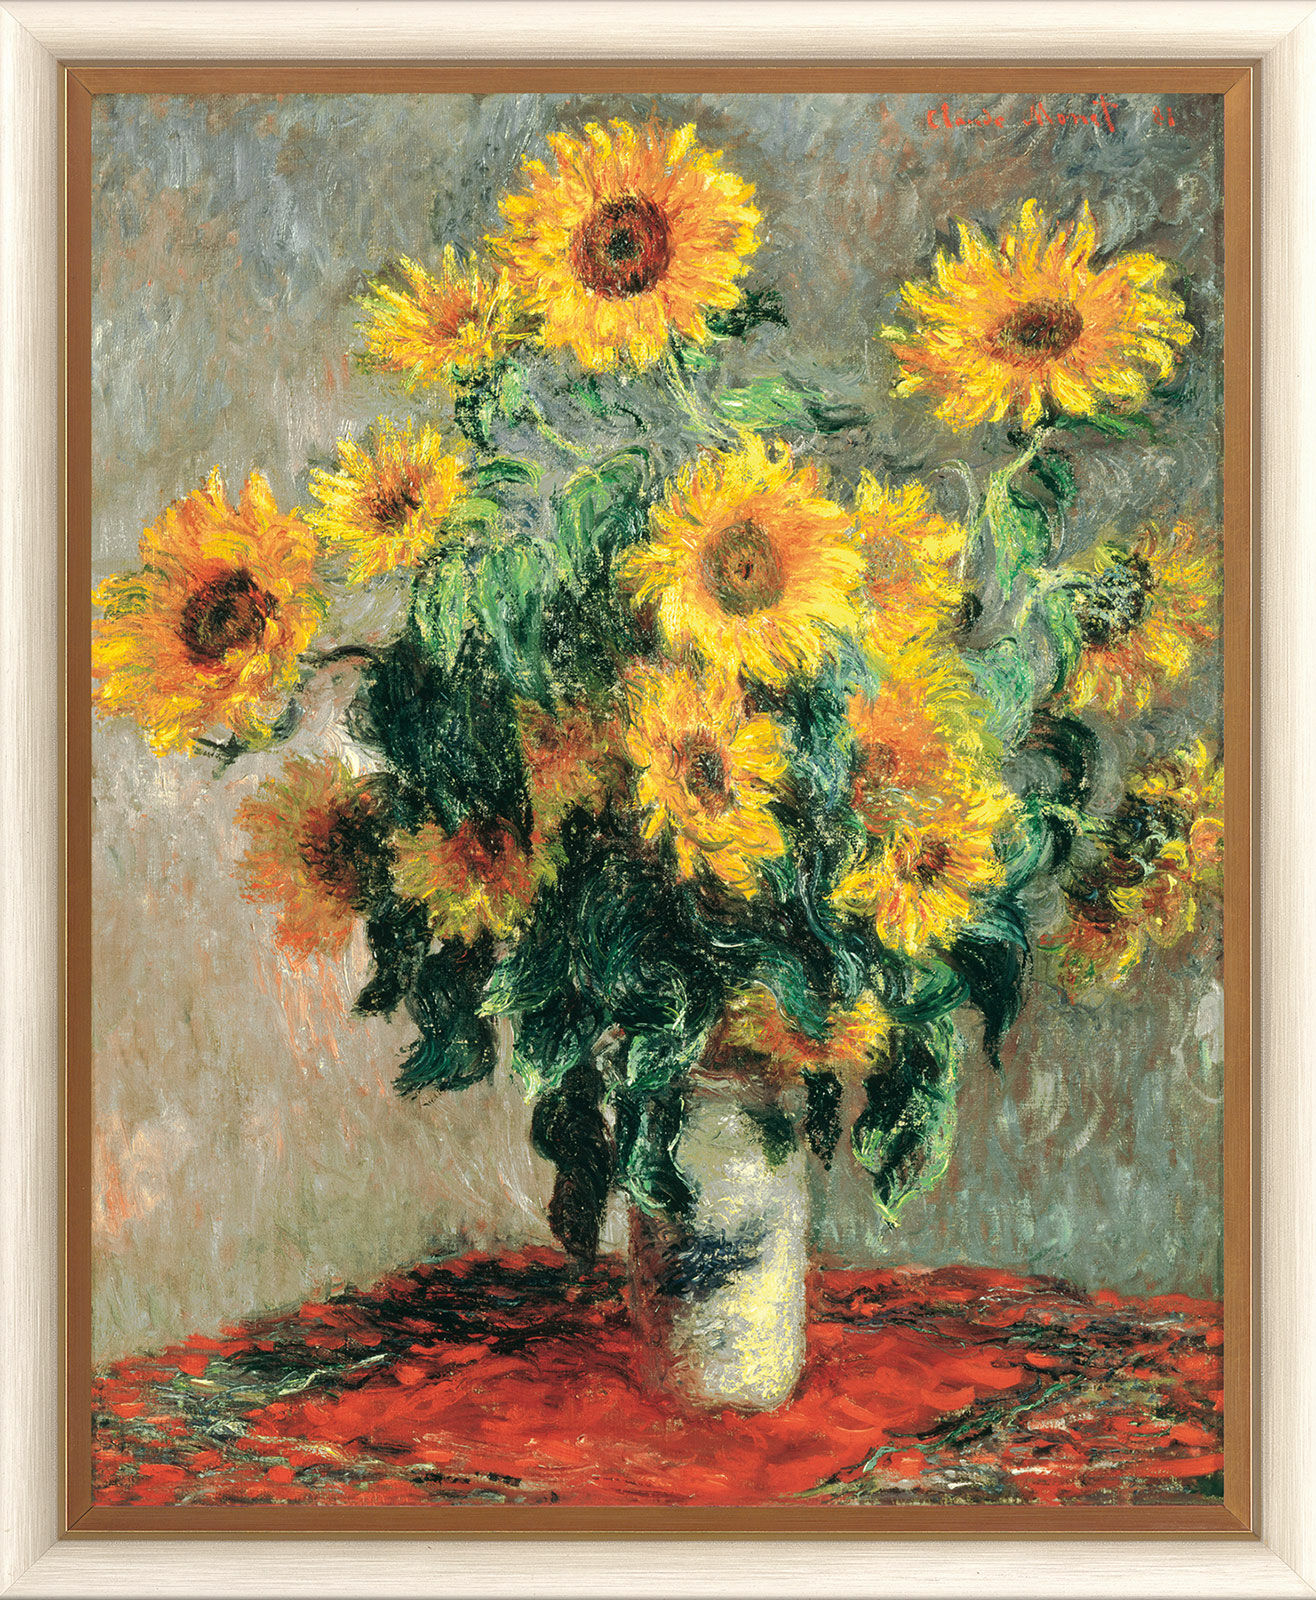 Picture "Sunflowers" (1880), framed by Claude Monet